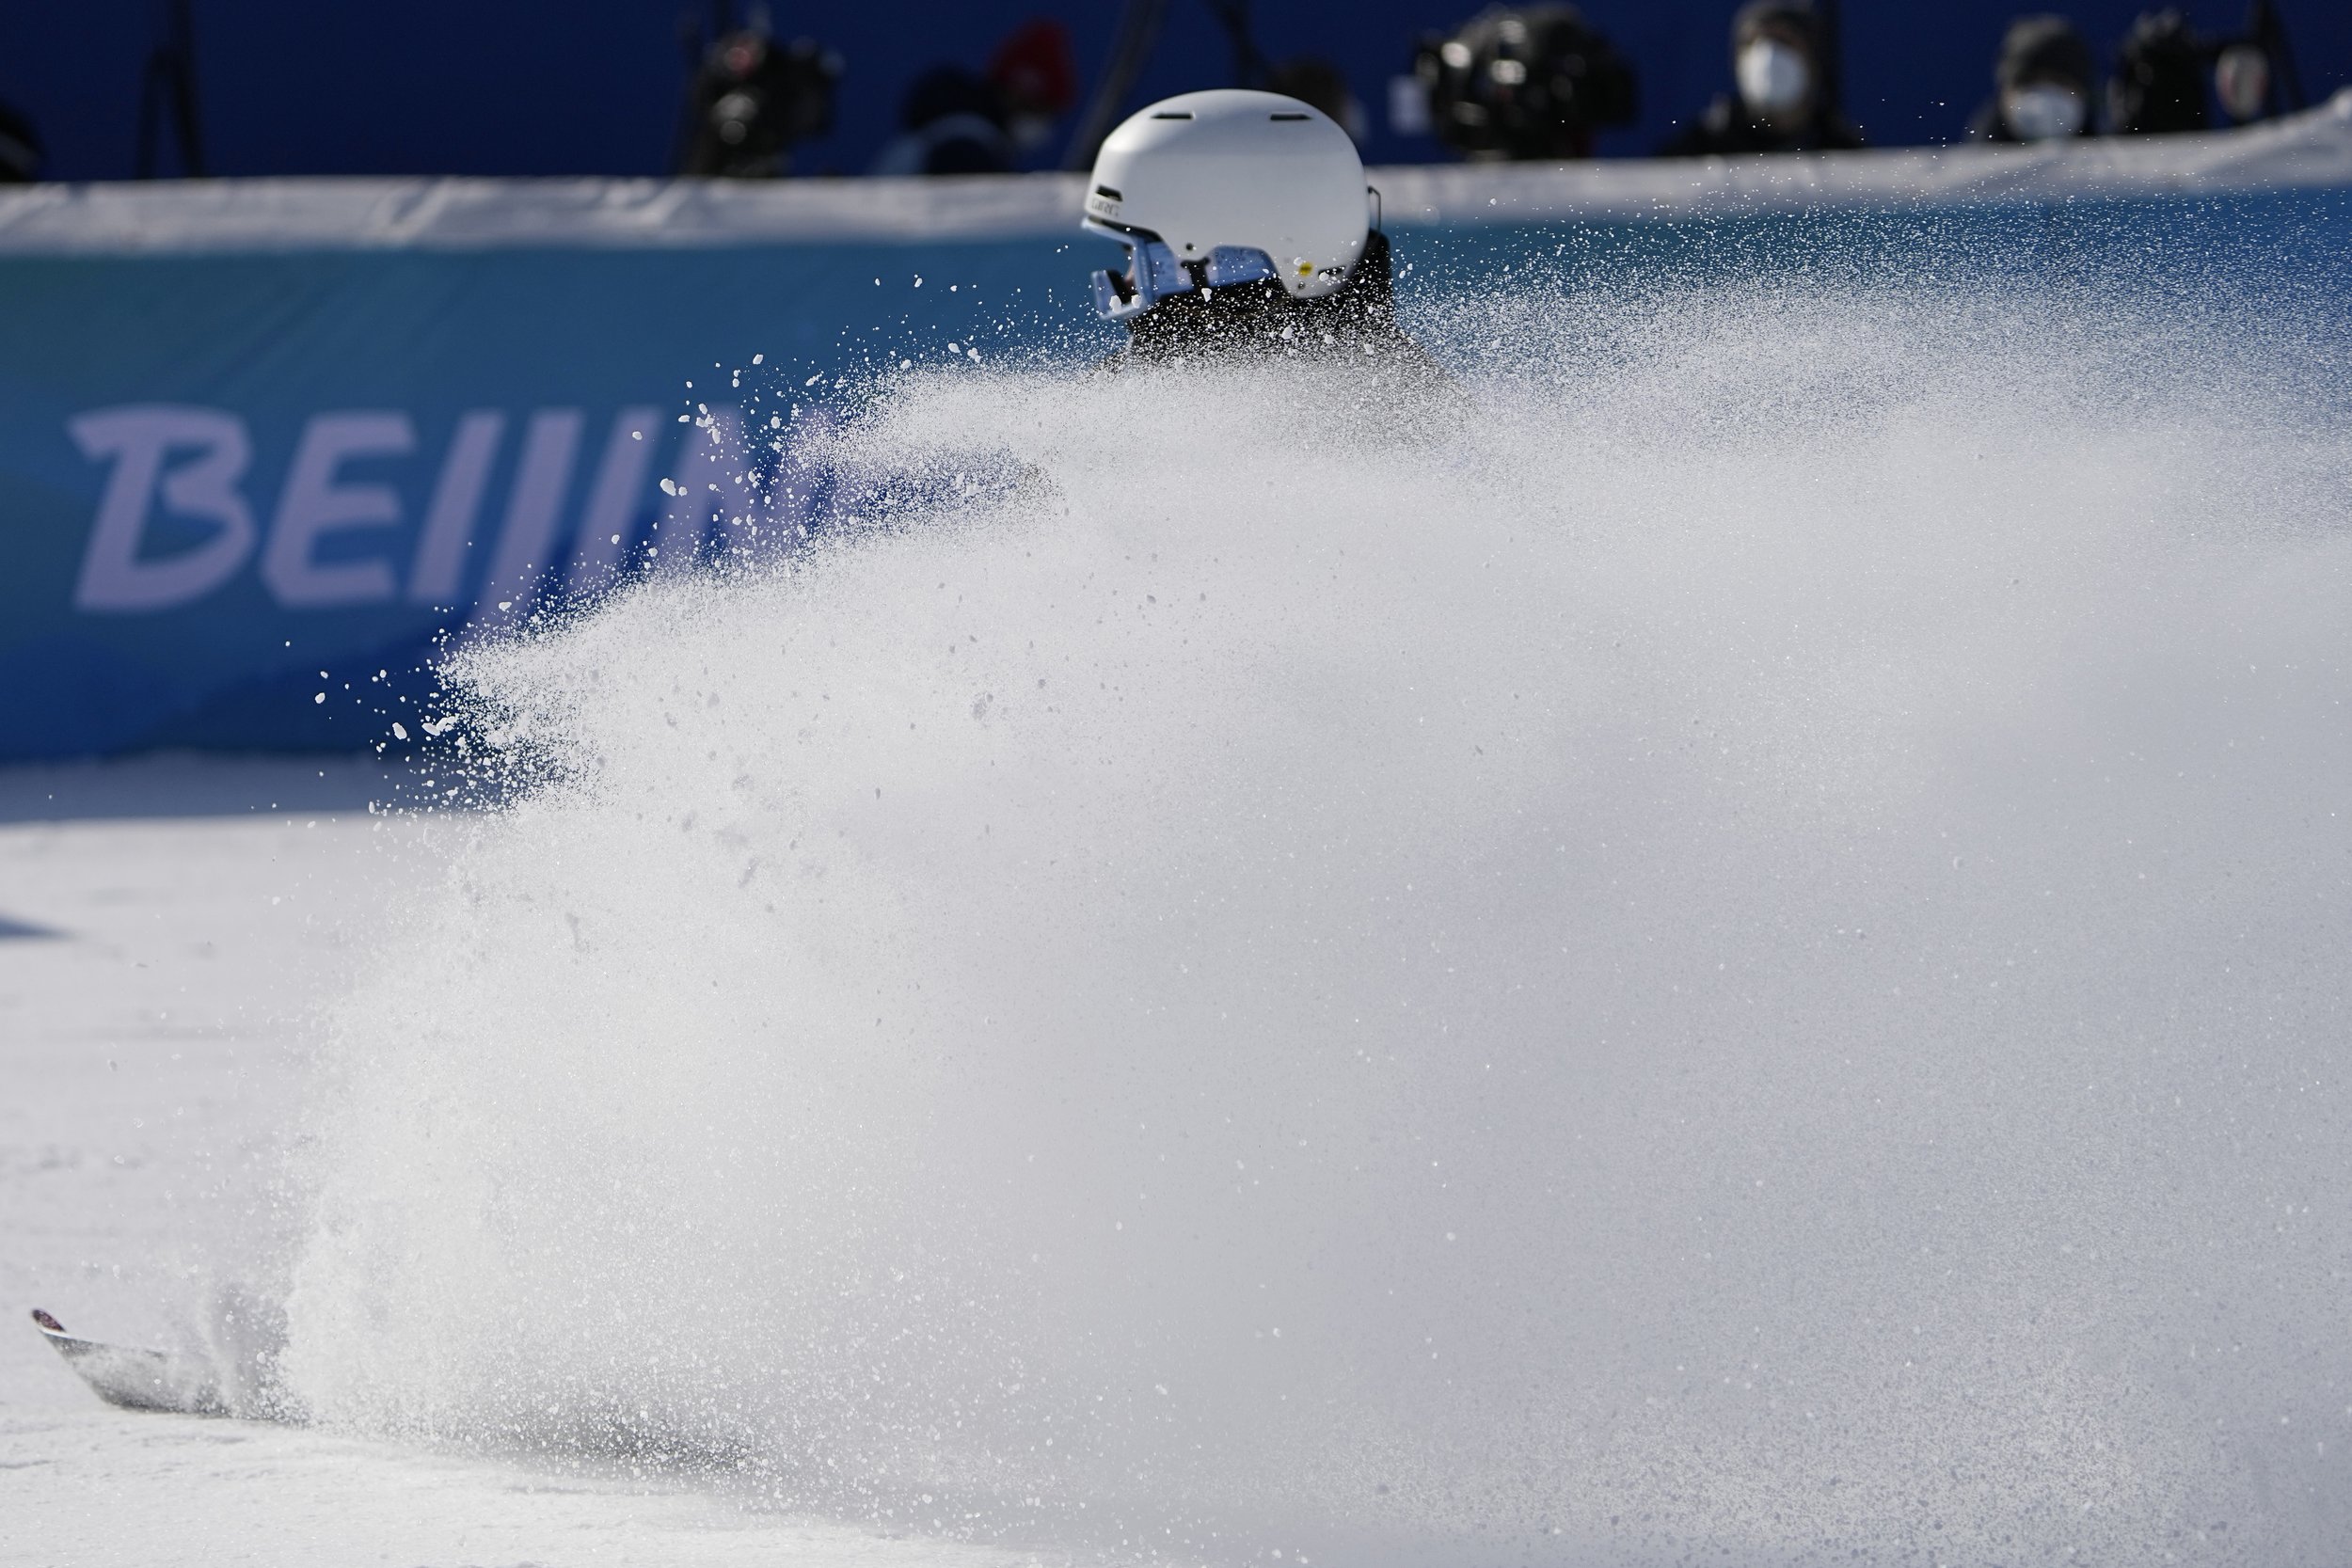  Yang Shuorui of China lands during the women's freestyle skiing Big Air qualification round of the 2022 Winter Olympics, Monday, Feb. 7, 2022, in Beijing. (AP Photo/Jae C. Hong) 